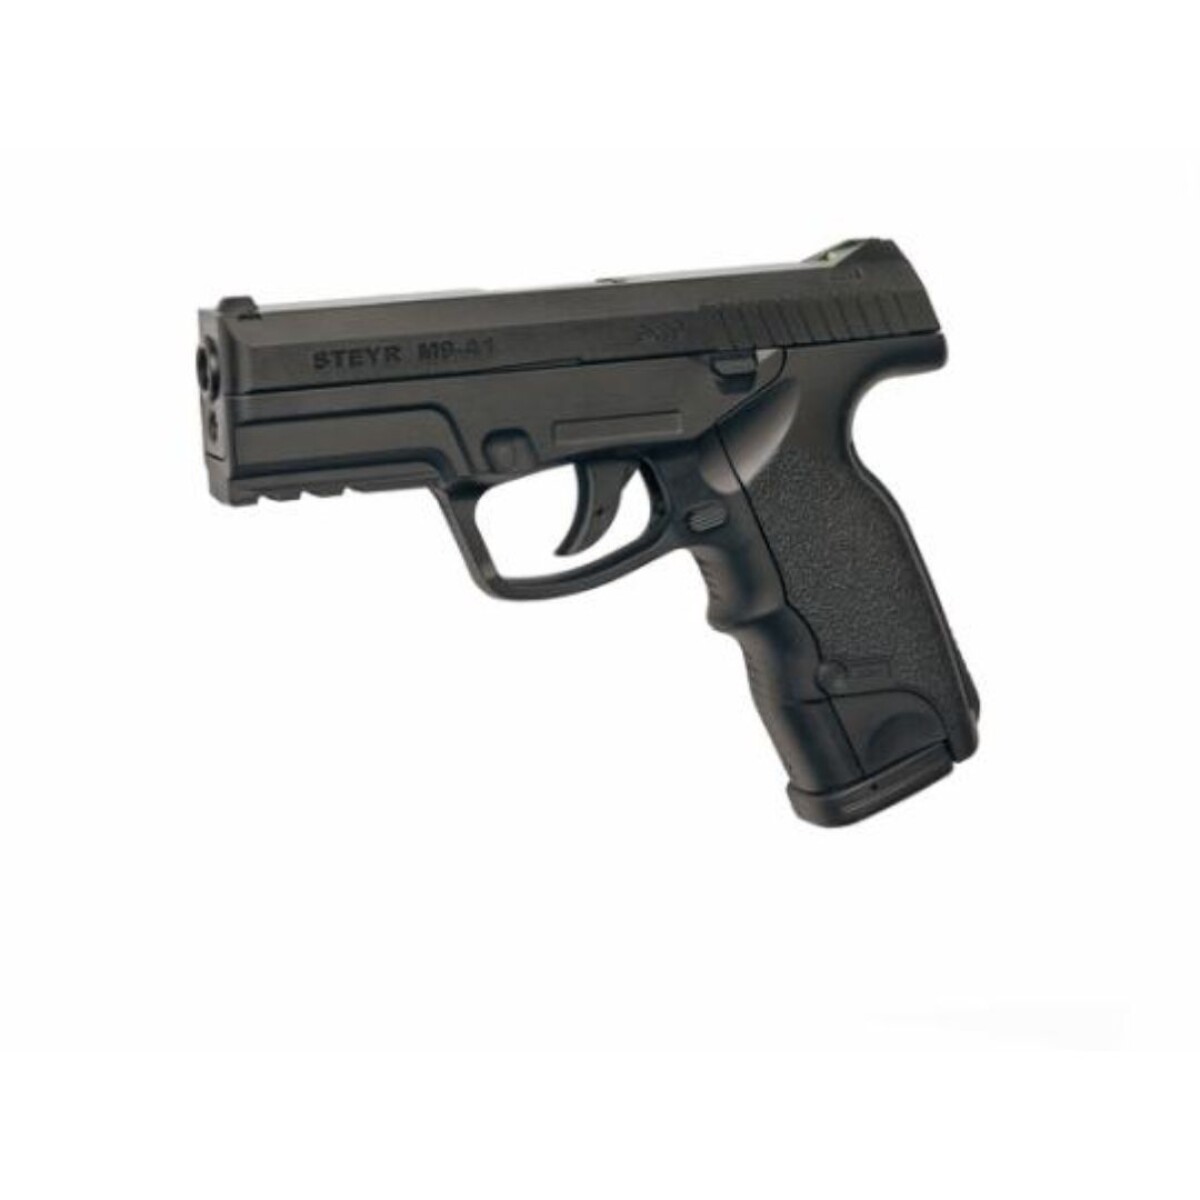 Steyr M9-A1 1.1 joules - CO2 